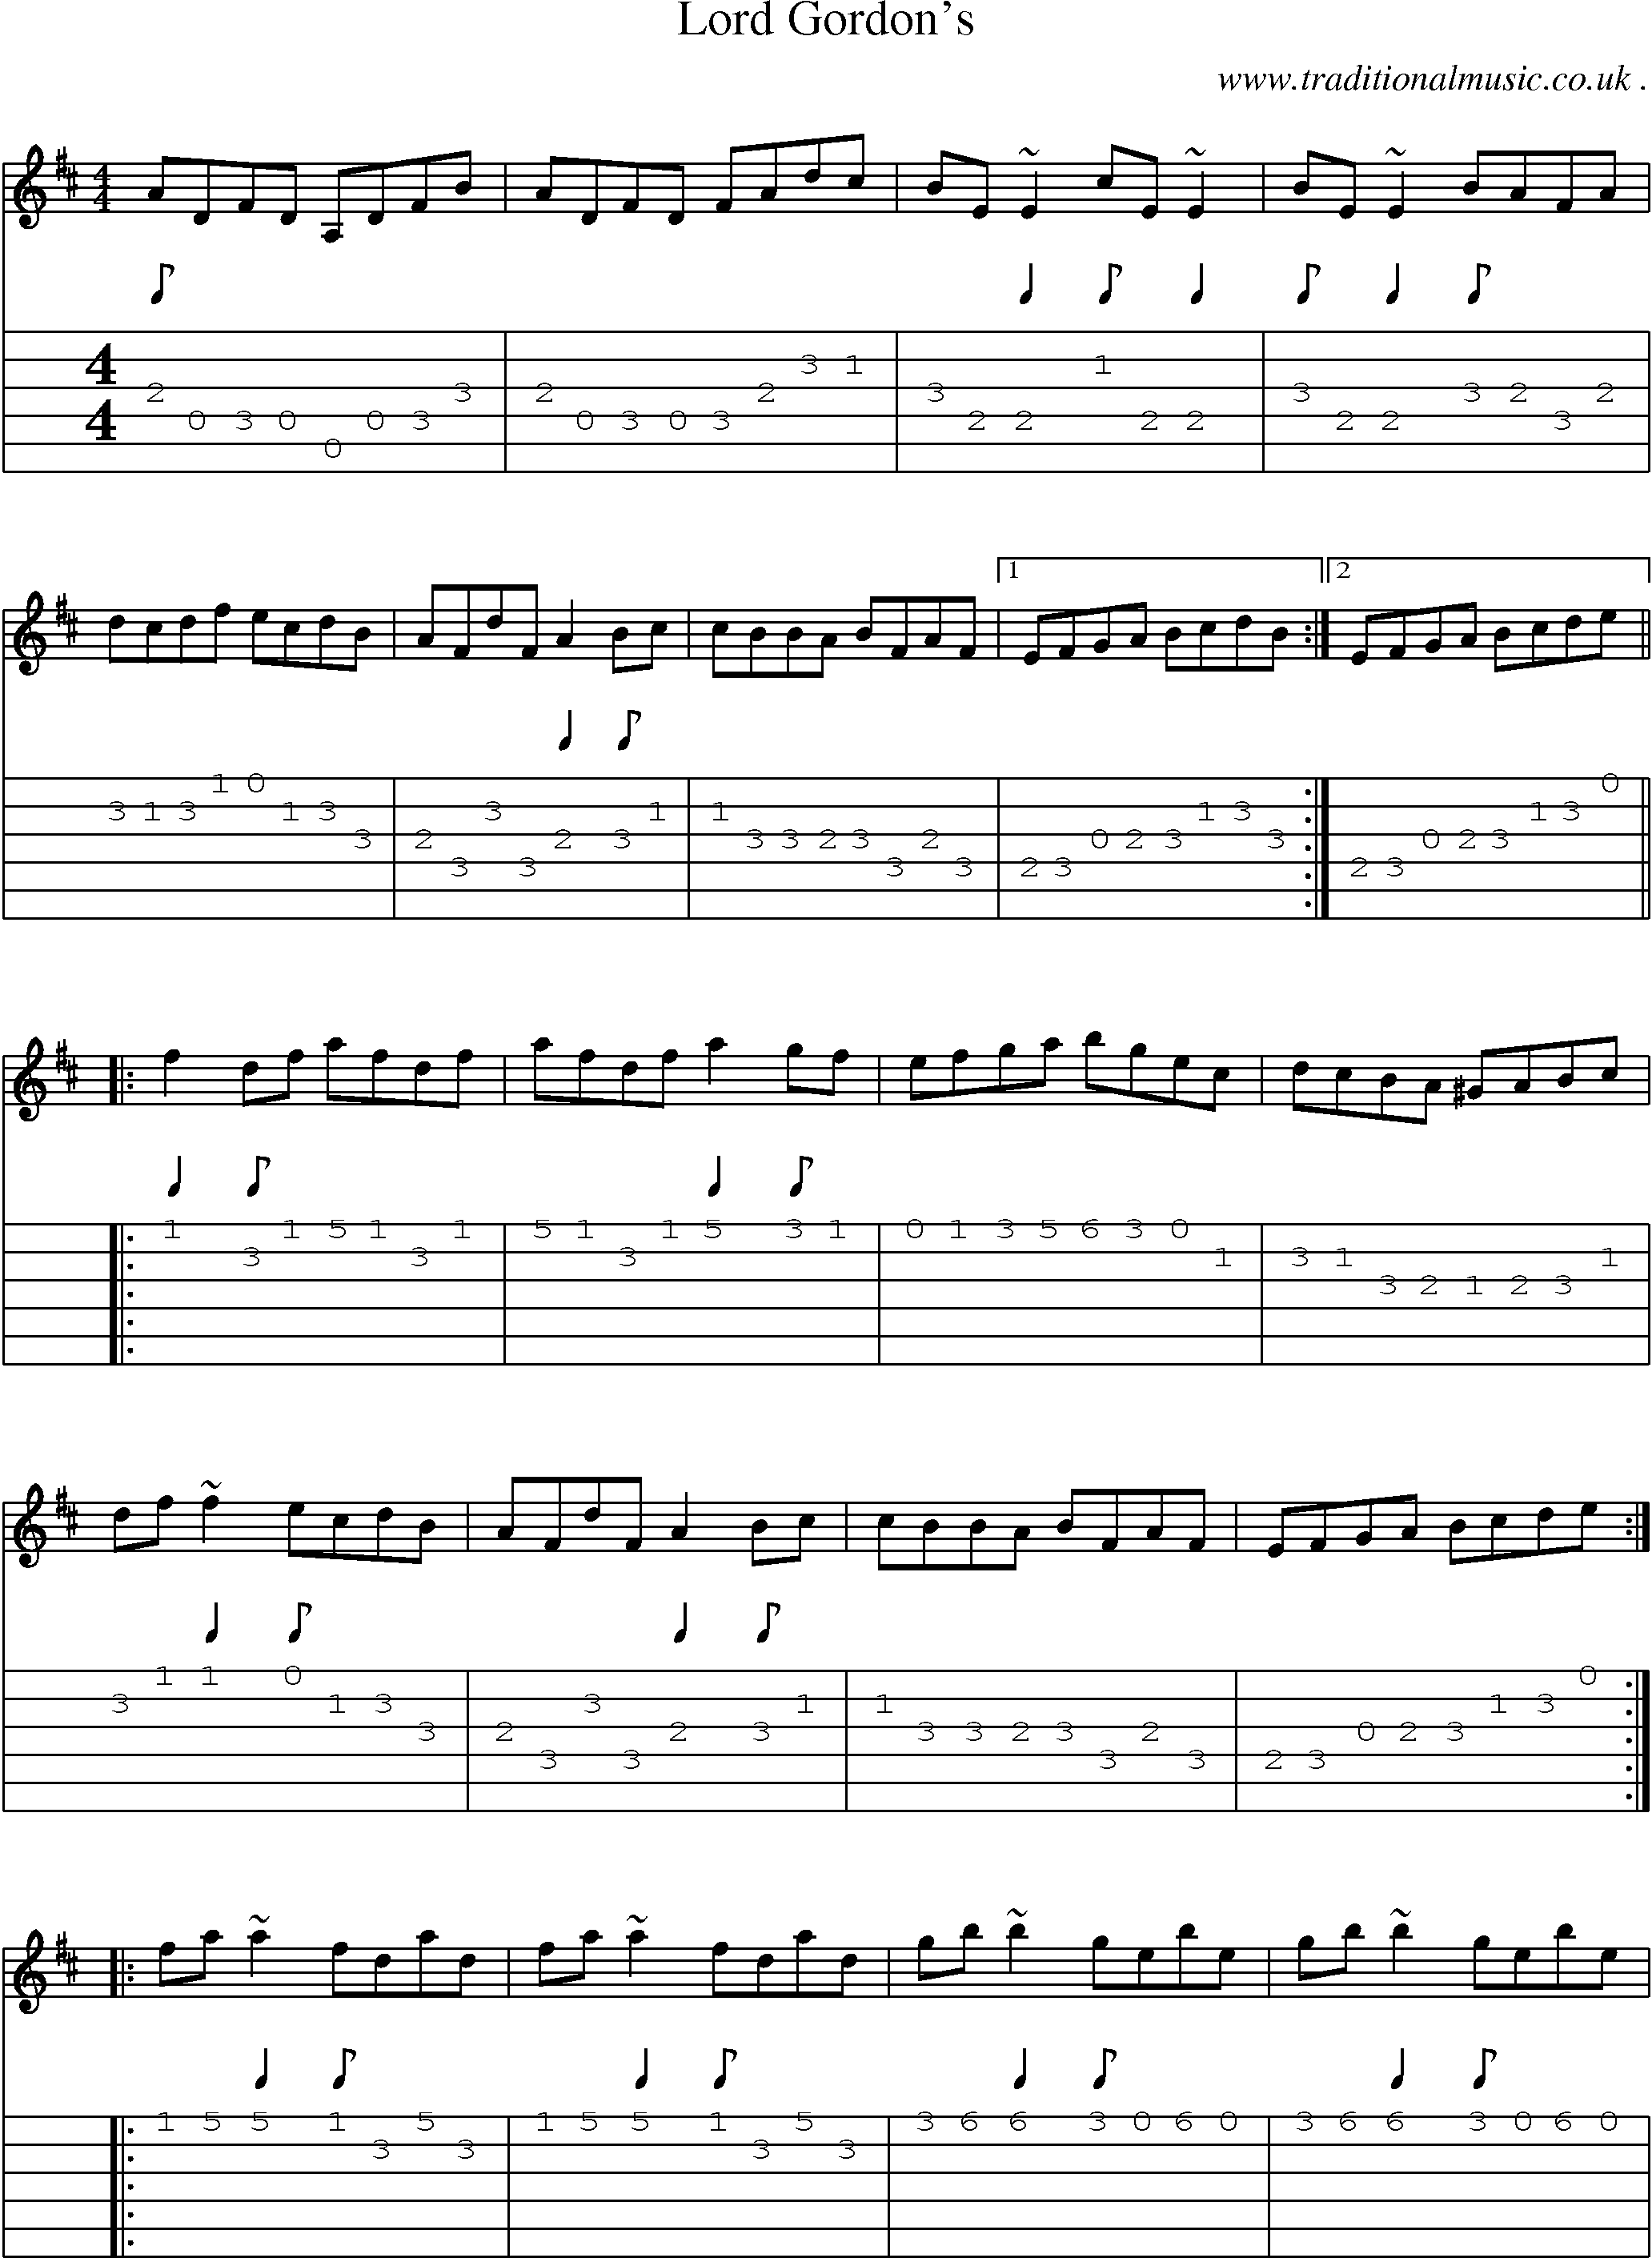 Sheet-music  score, Chords and Guitar Tabs for Lord Gordons